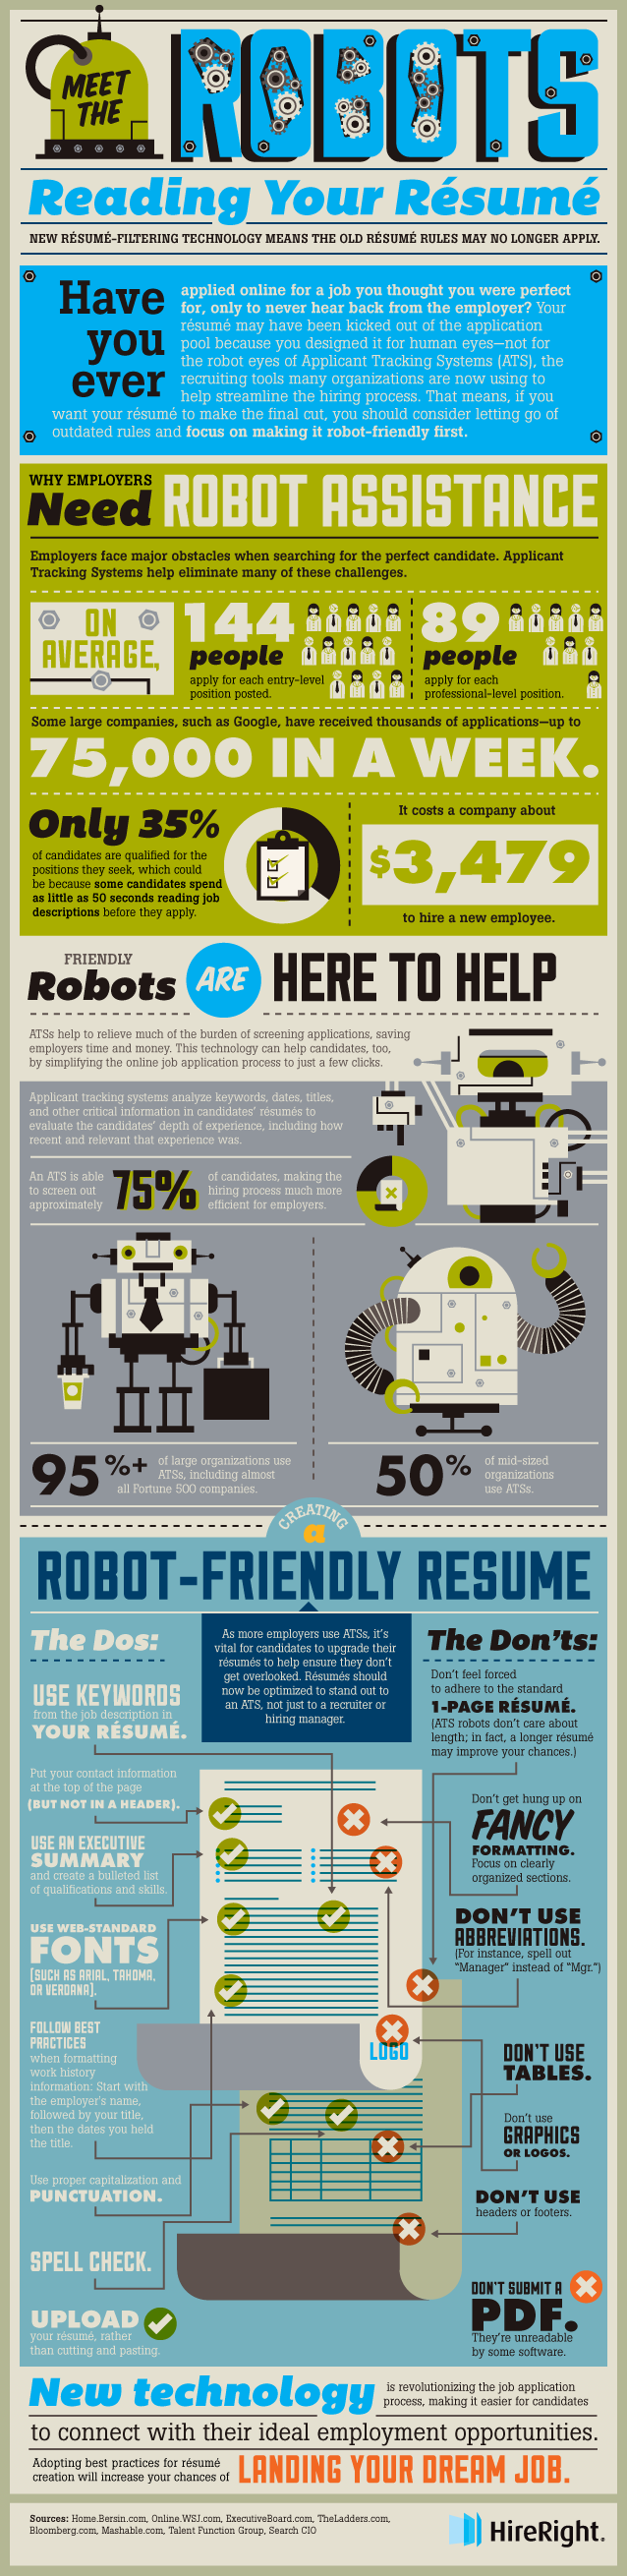 image explaining why every resume needs to be unique for the job you are applying for, as robots are reading your resume. If youd like someone from Career Services to help you with your resume, give us a call to schedule an appointment. We can be reached at 806.371.5147